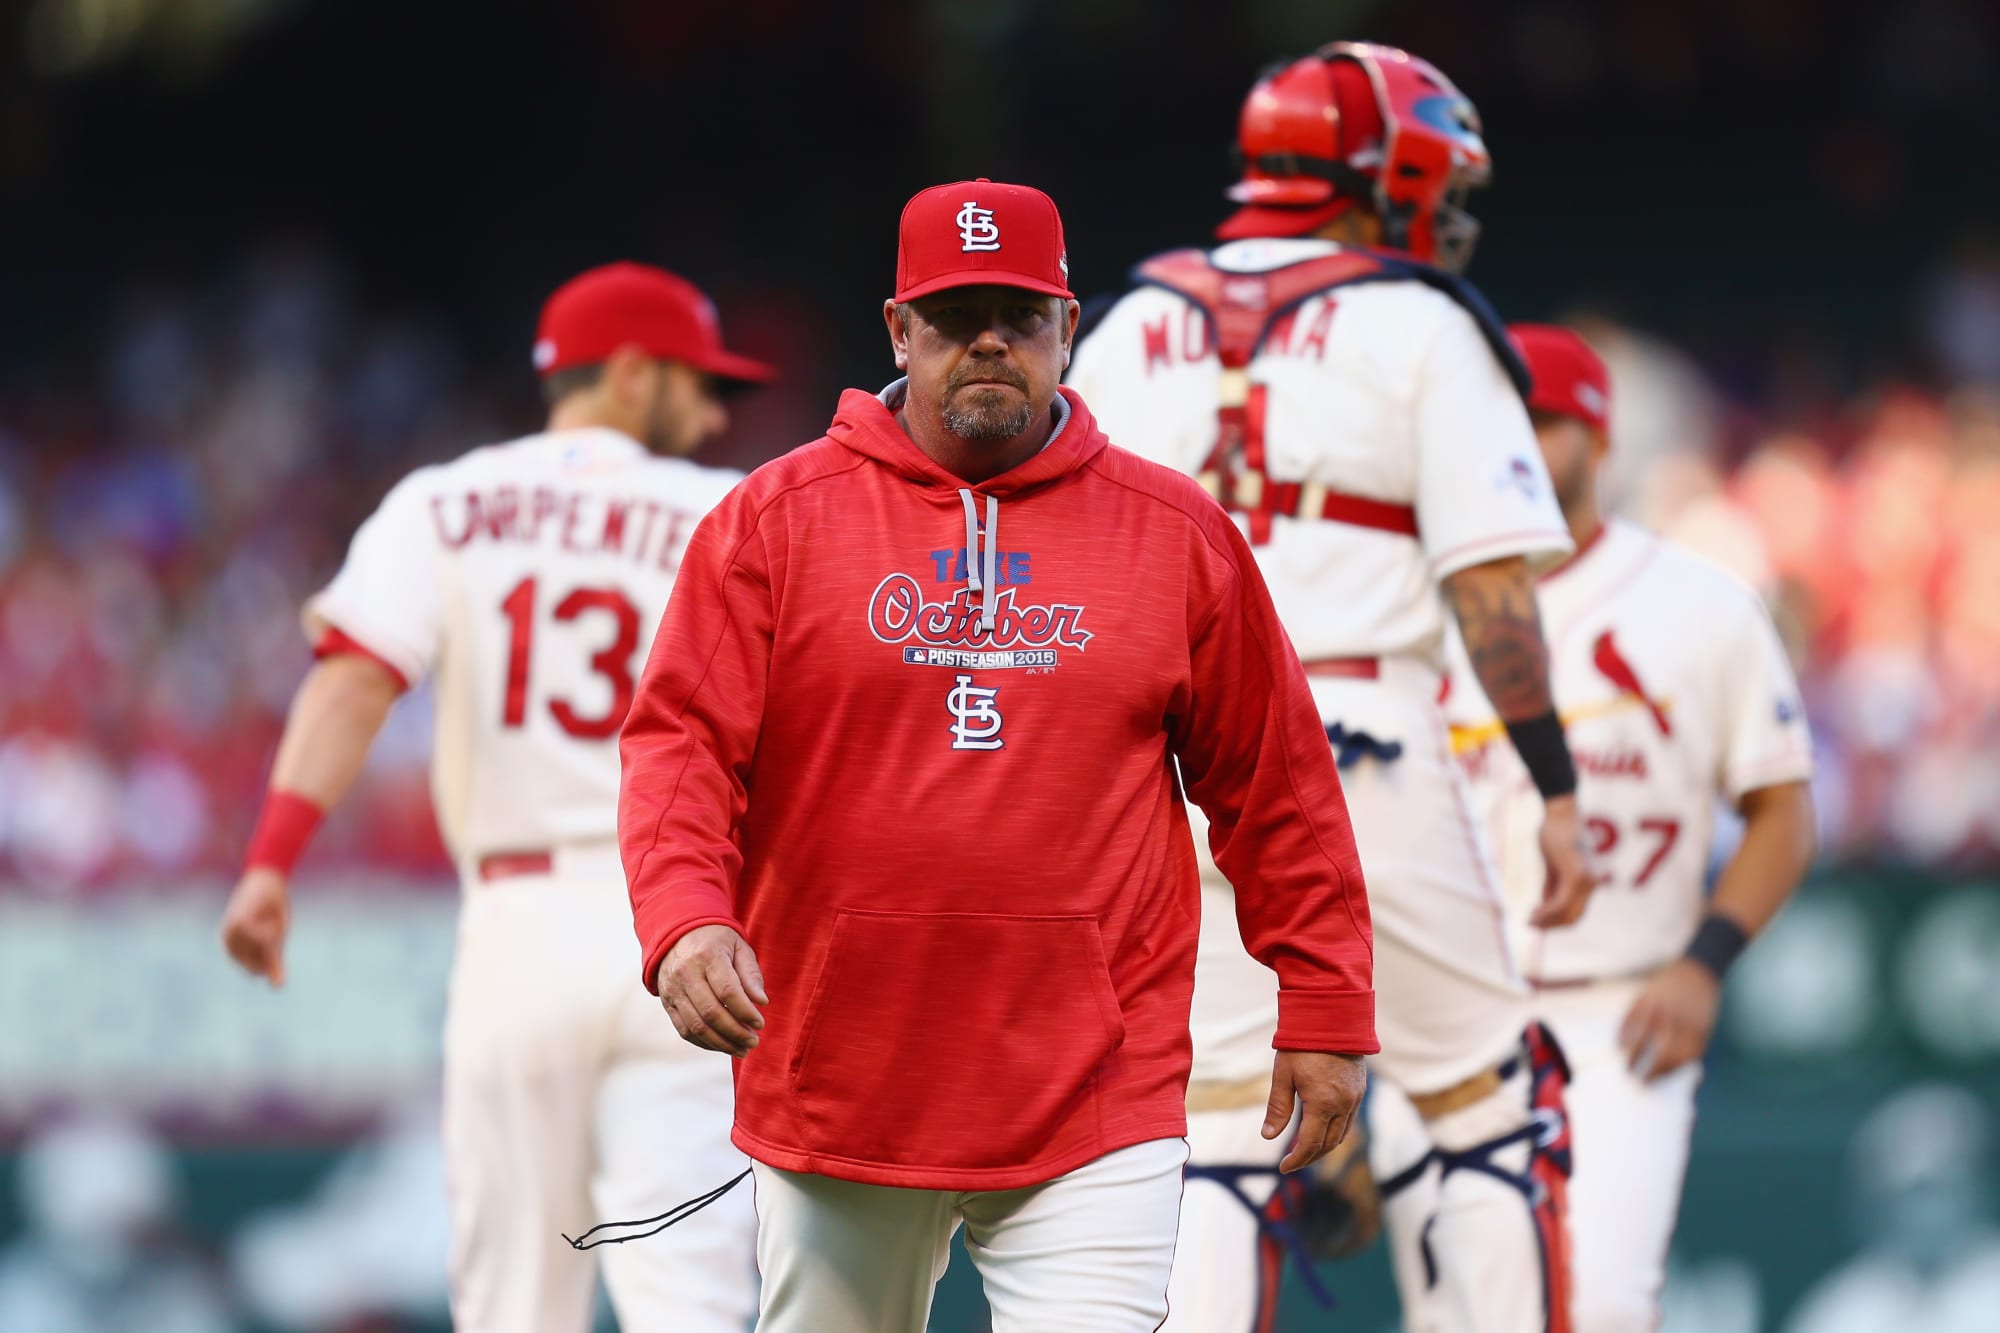 St. Louis Cardinals: Pitching coach options and desires